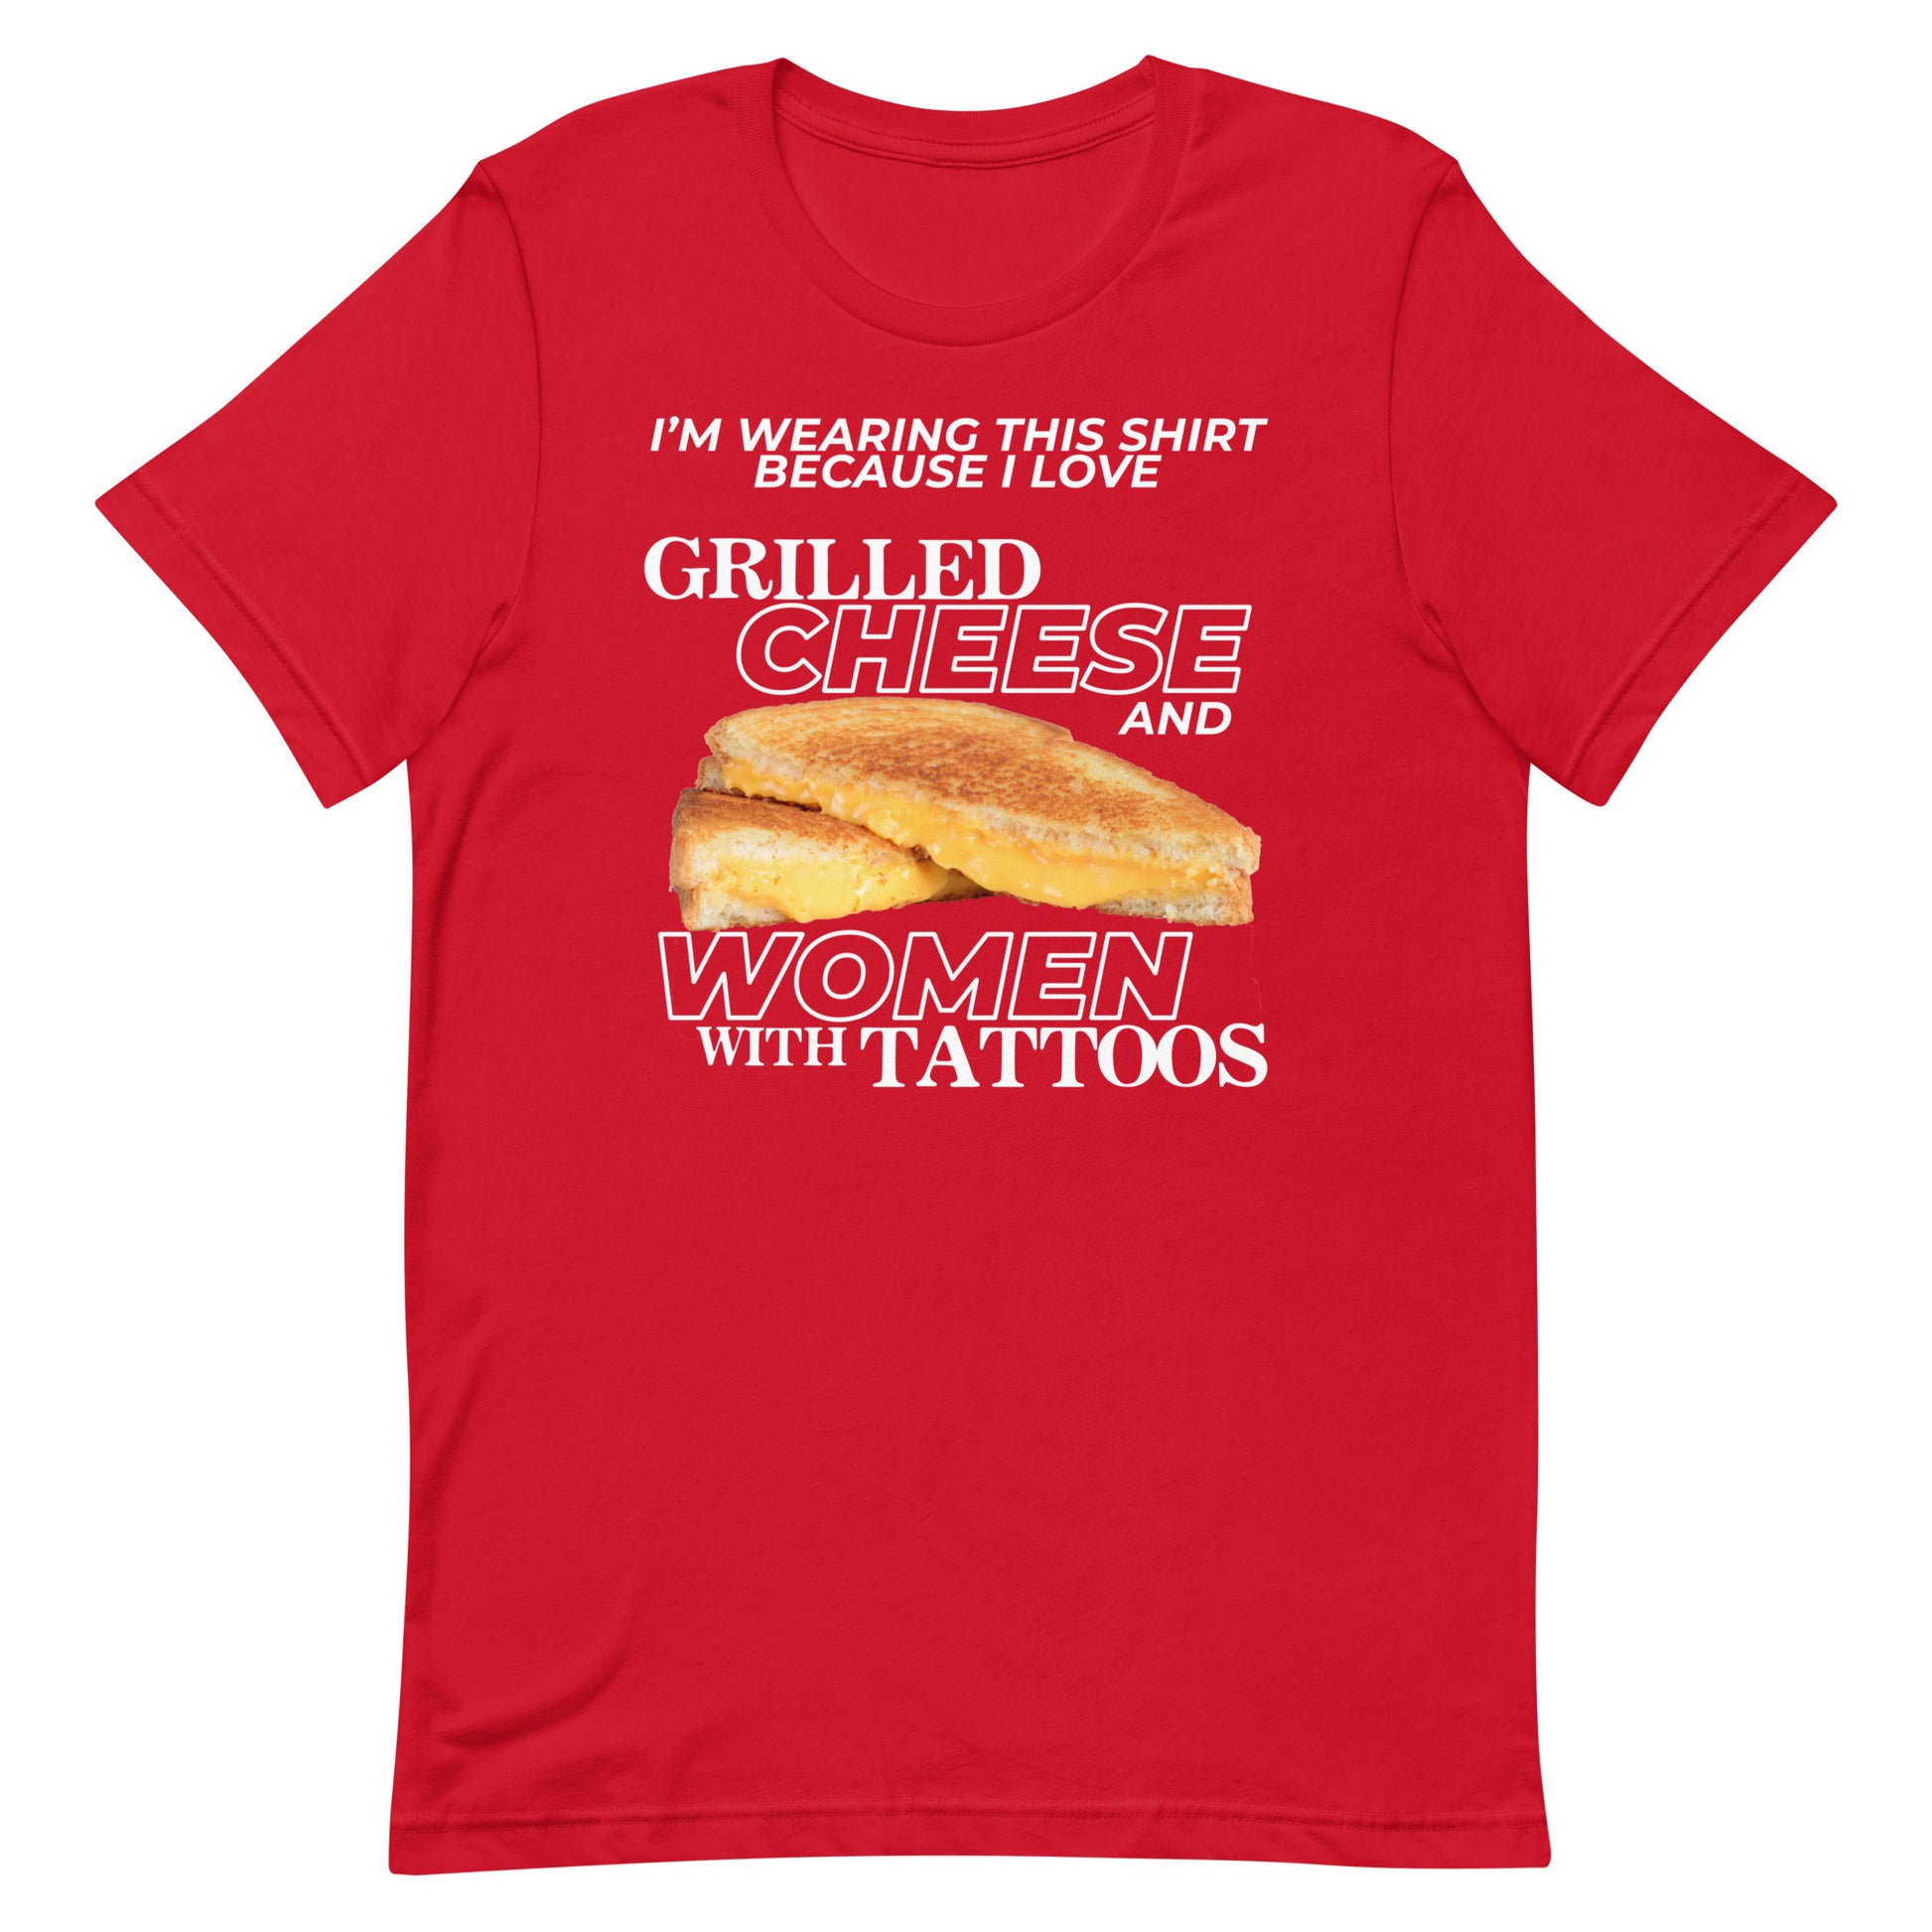 I Love Grilled Cheese & Women With Tattoos Unisex t-shirt